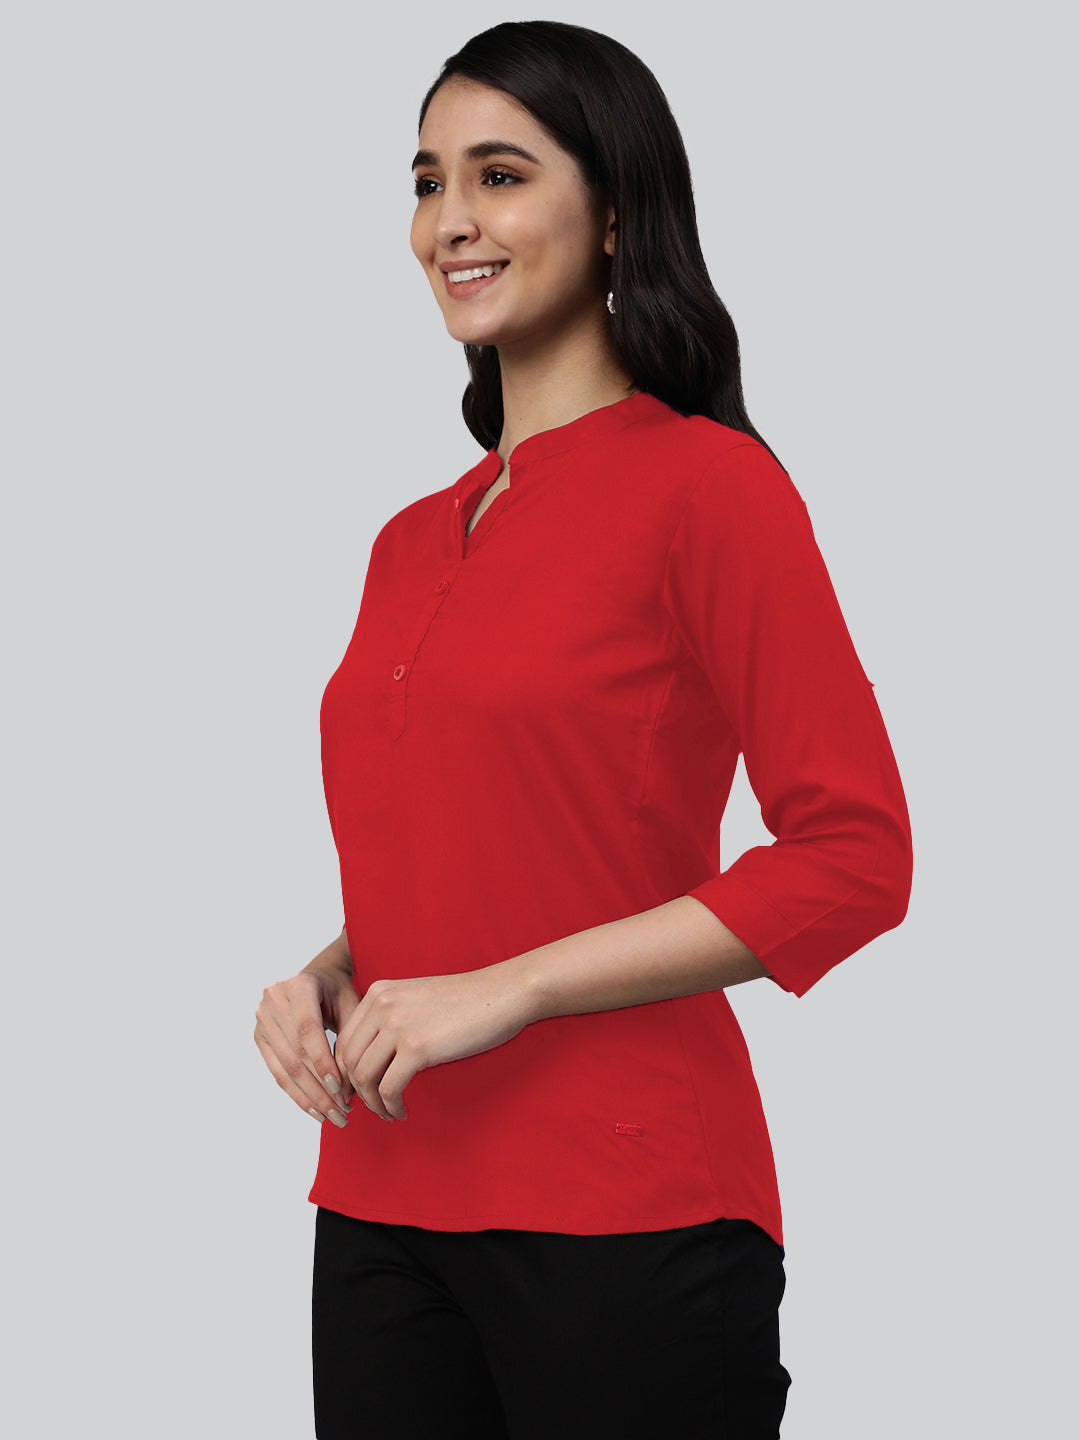 Red Woven Rayon Tunic #430